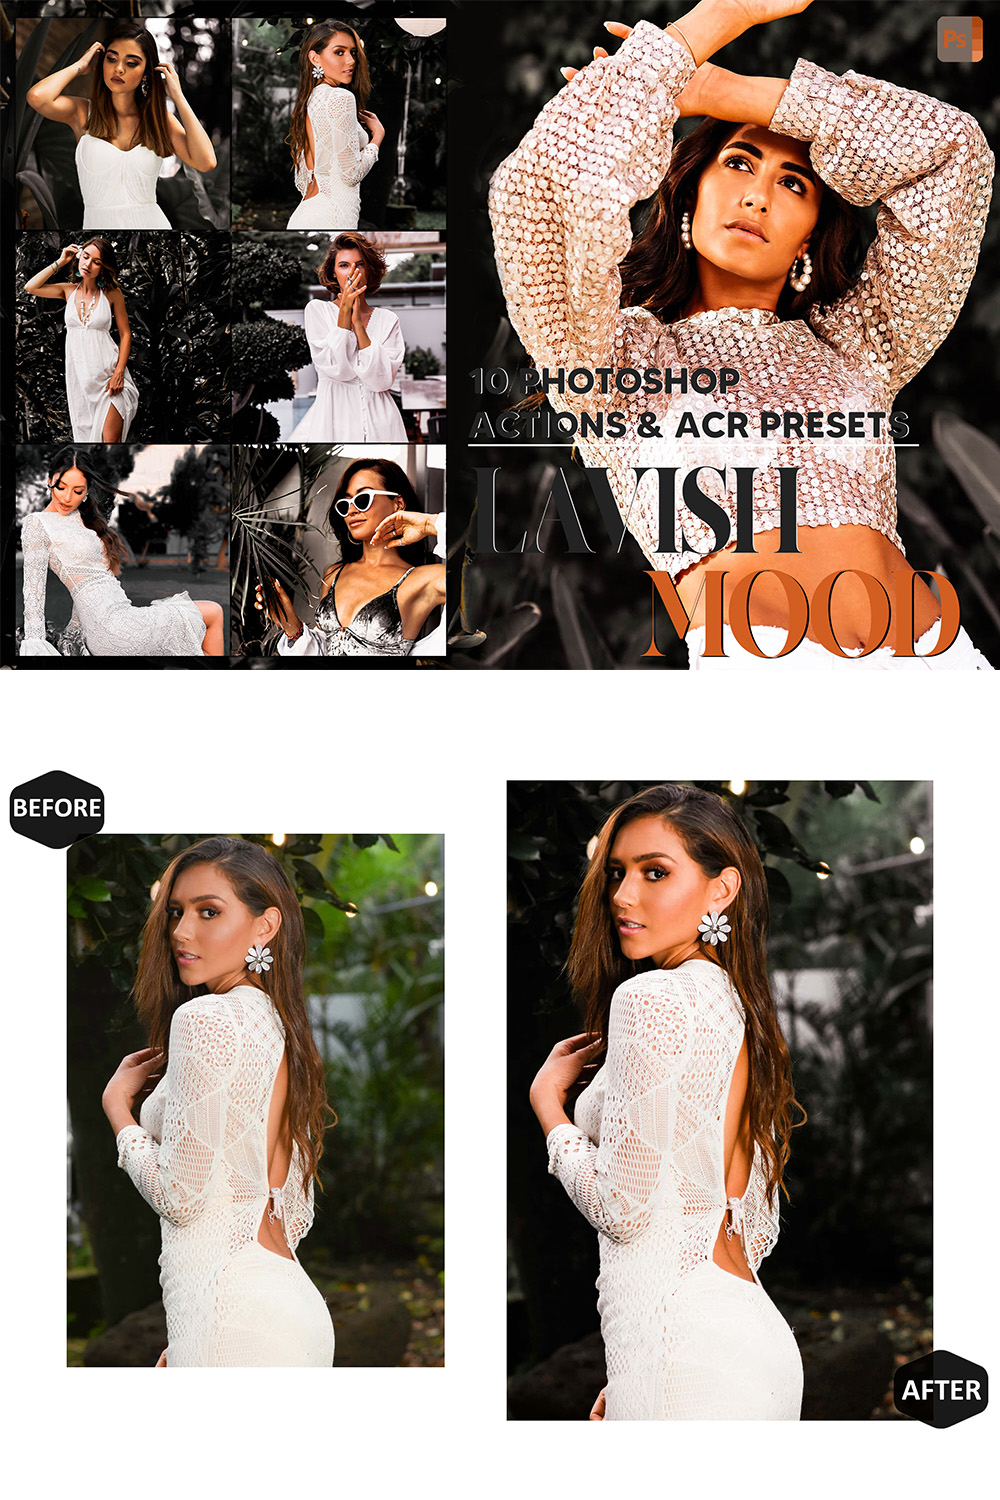 10 Photoshop Actions, Lavish Mood Ps Action, Lifestyle ACR Preset, Lux Ps Filter, Atn Pictures And style Theme For Instagram, Blogger pinterest preview image.